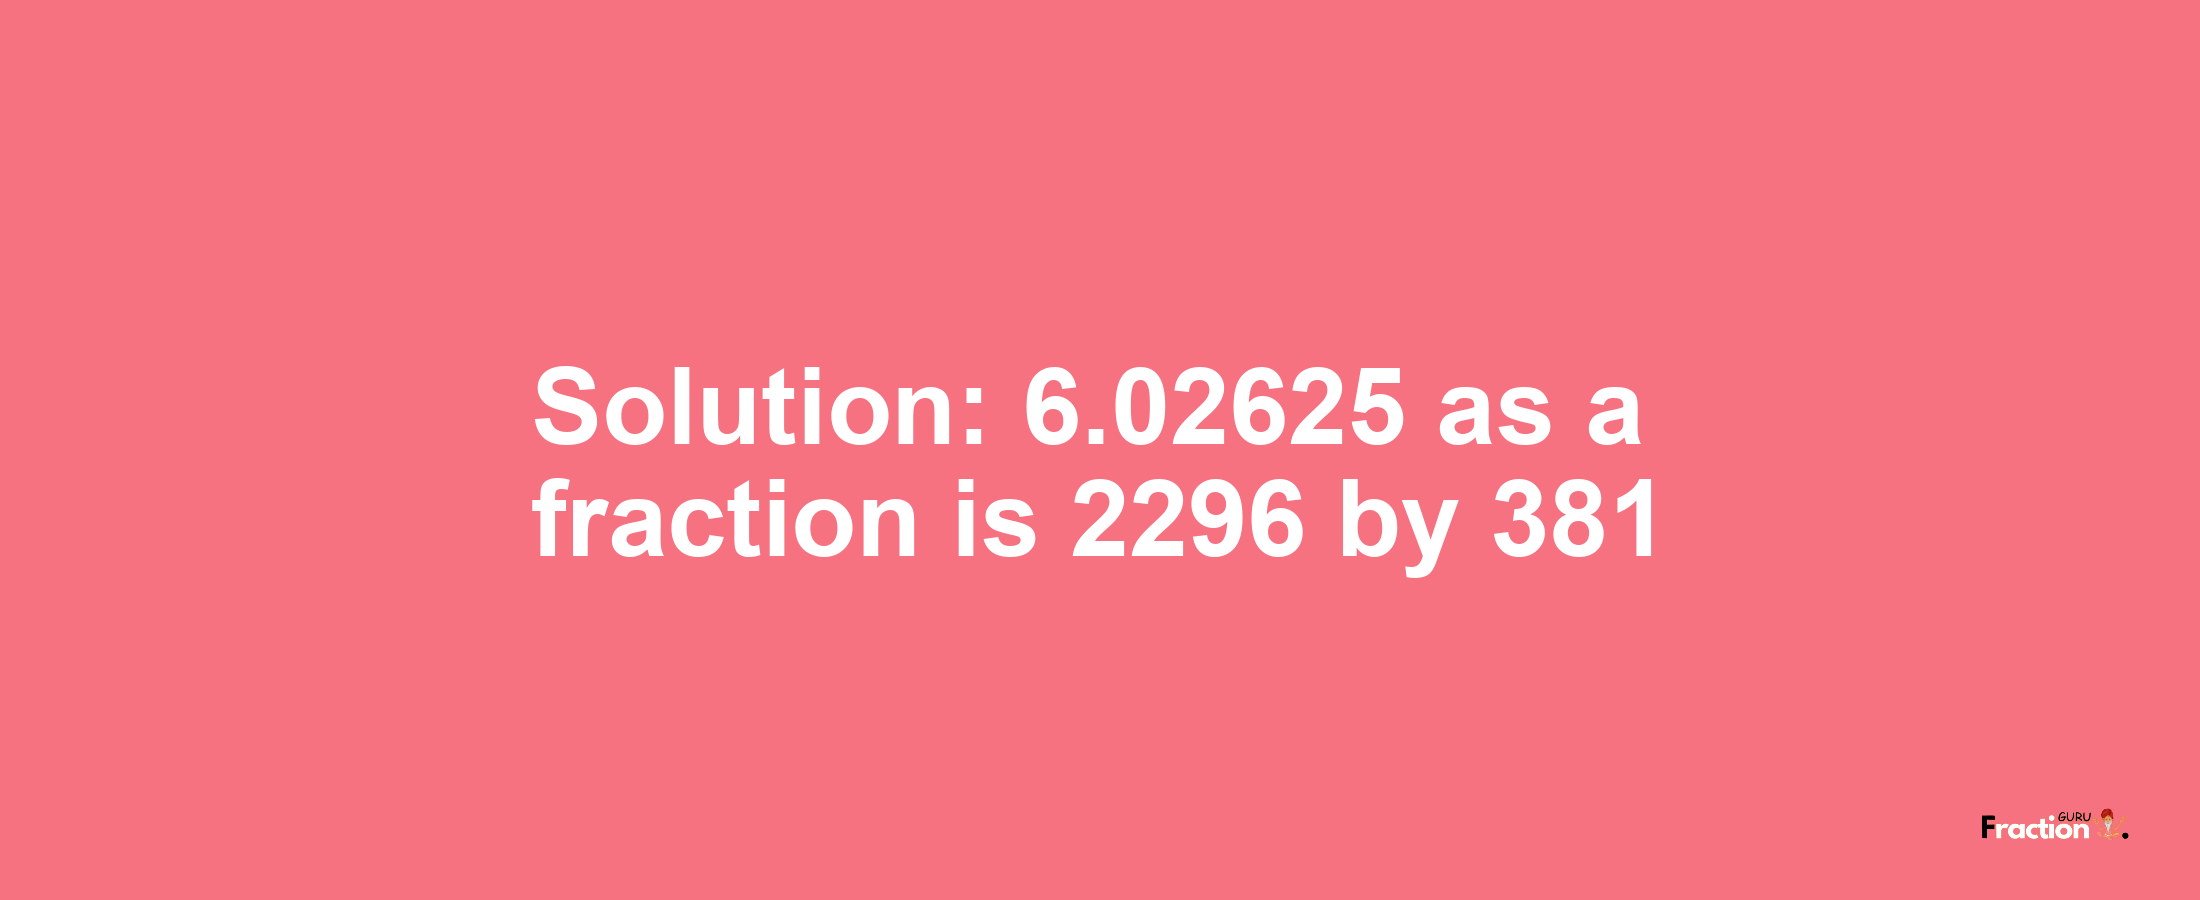 Solution:6.02625 as a fraction is 2296/381